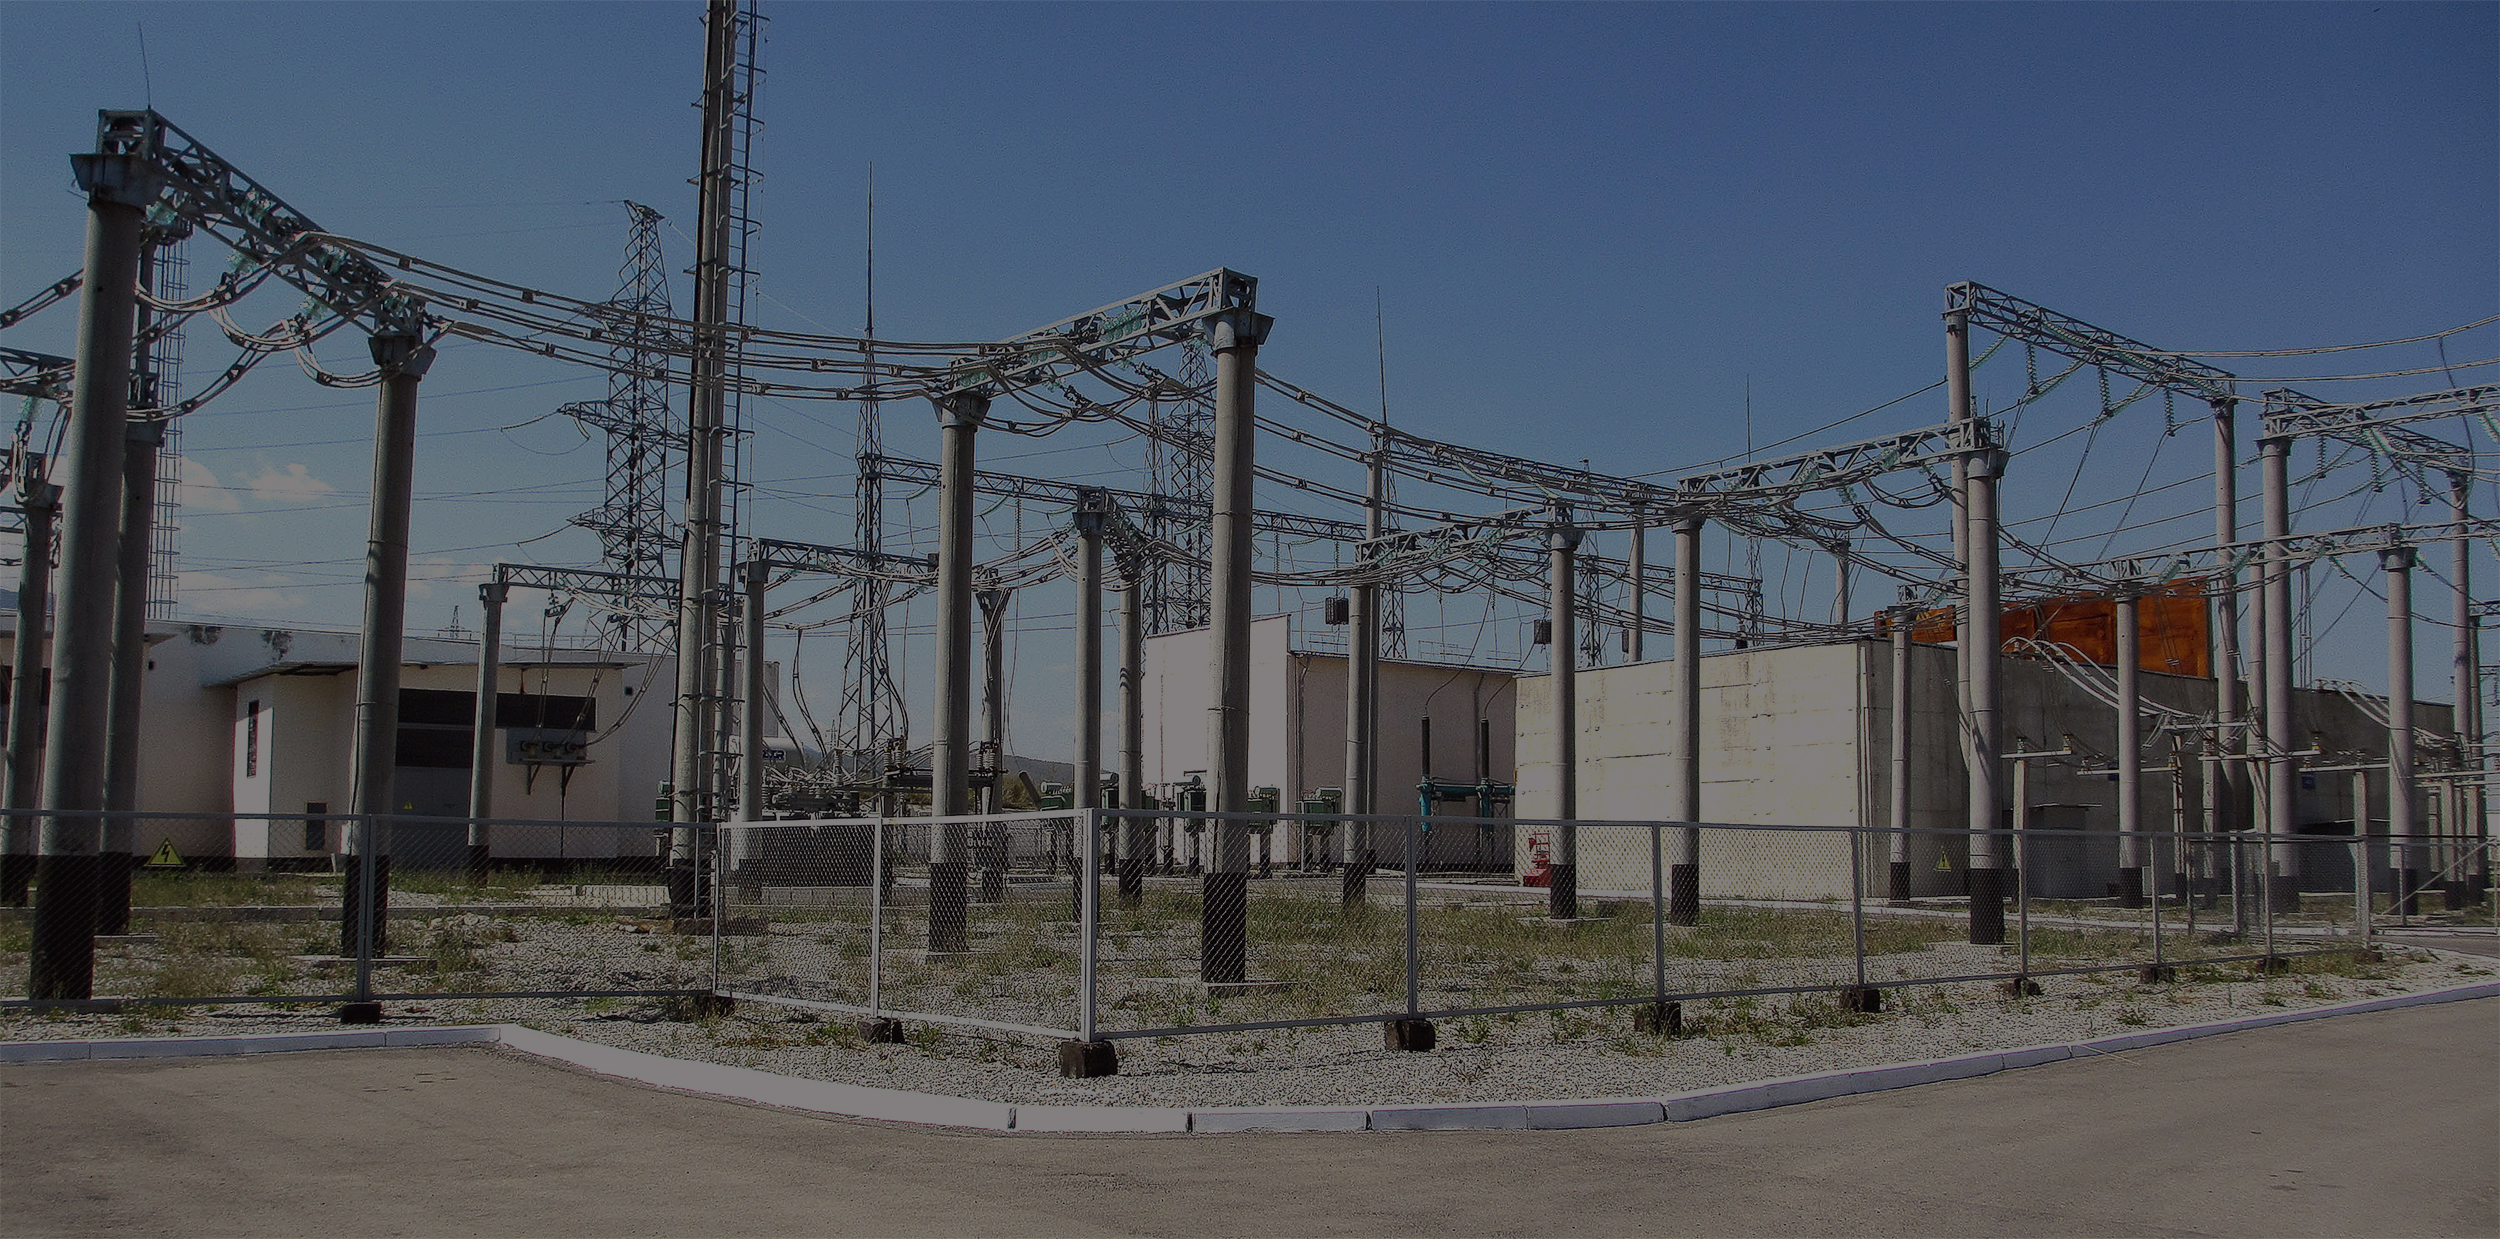  Electrical substation